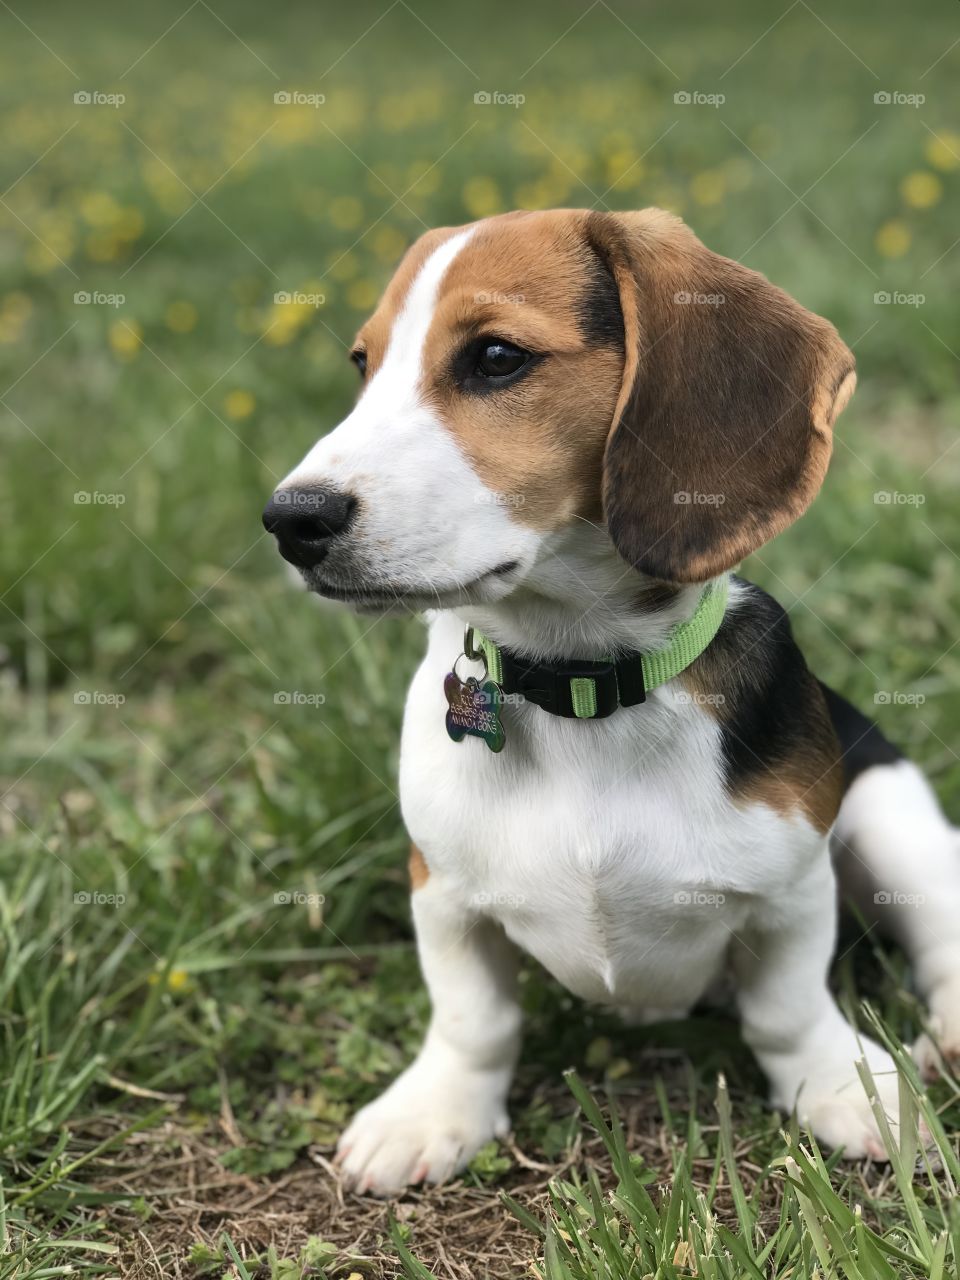 This is Rocket. He is a Doxle (beagle/daschund) 